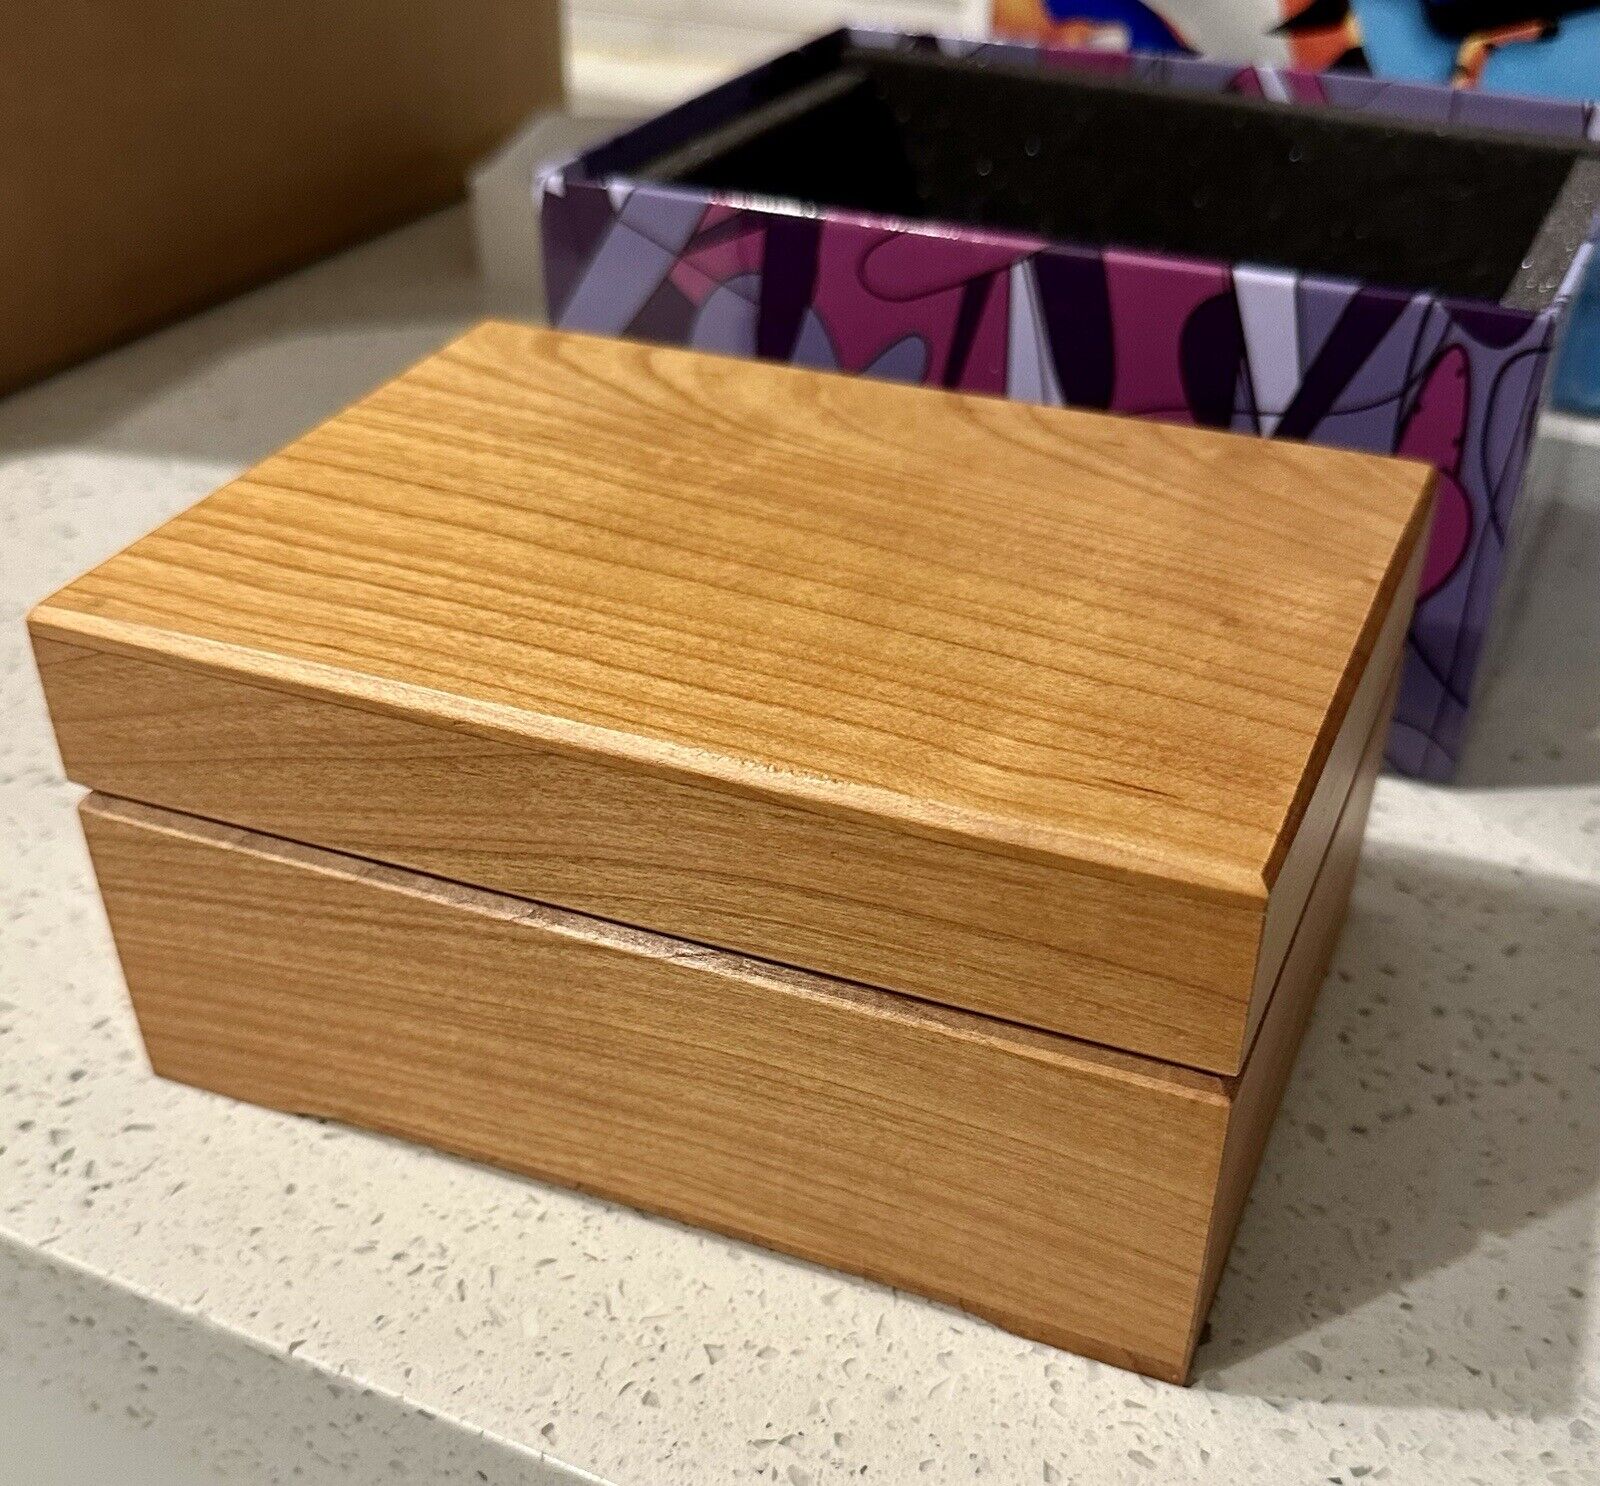 100% Cherry Wood  Smell Proof Storage Herb Box